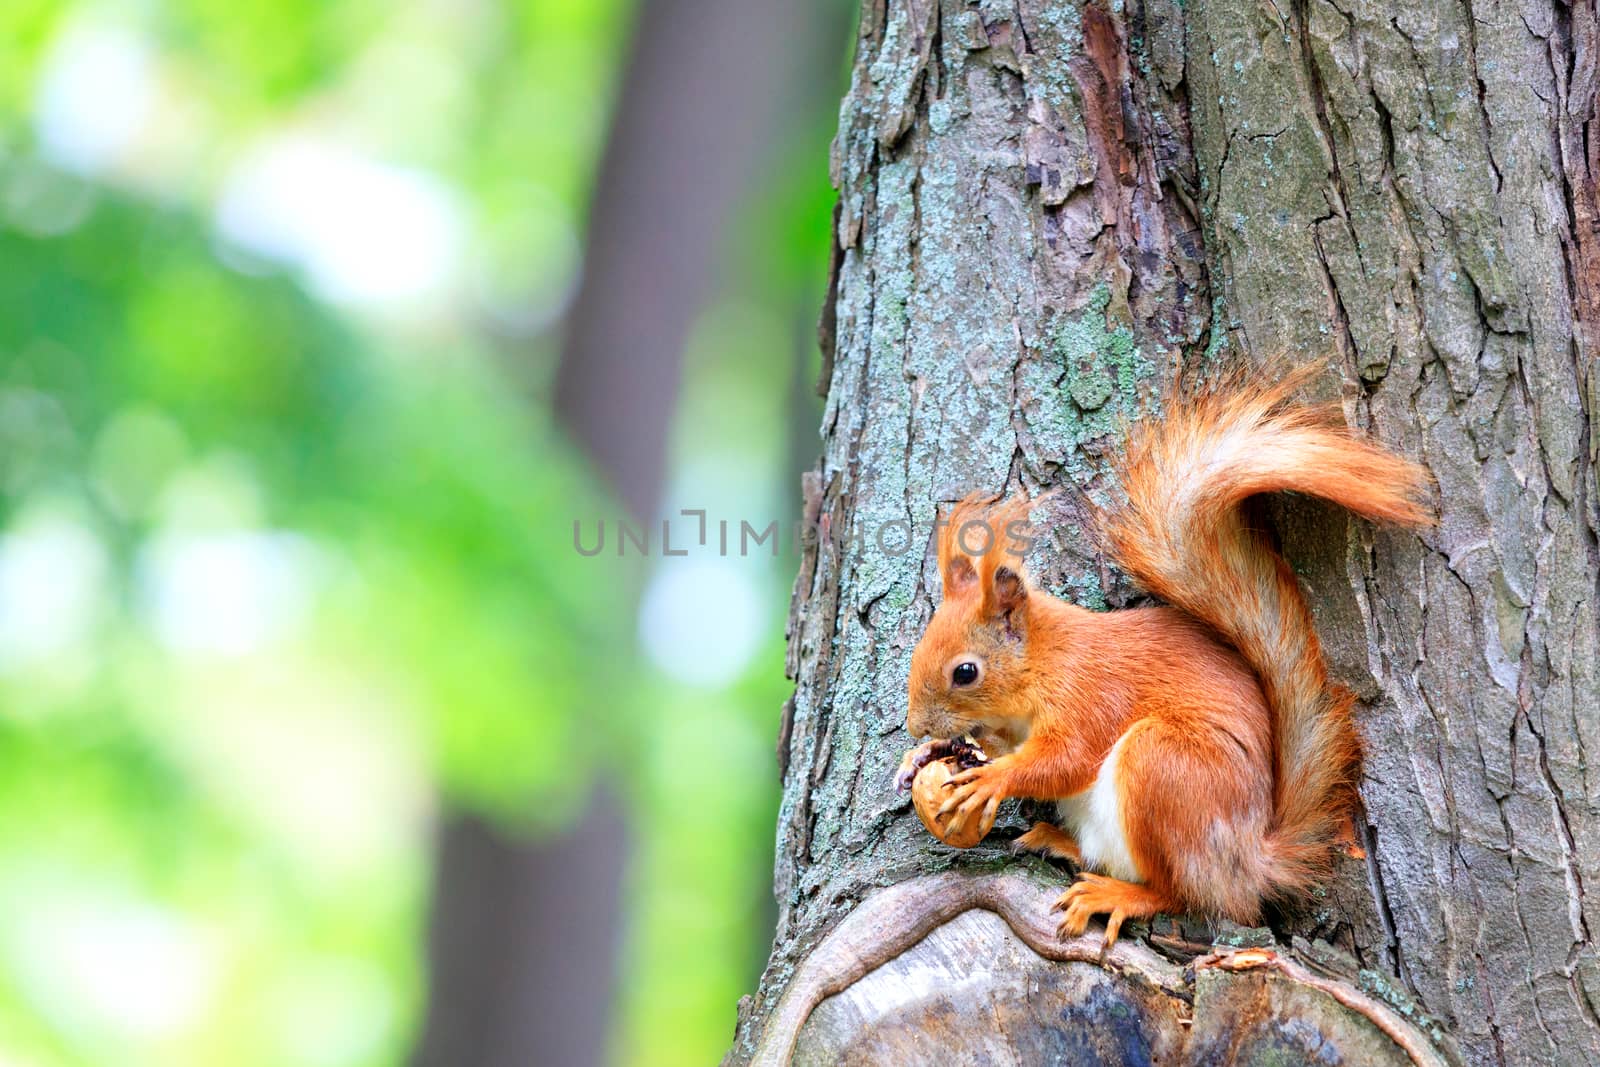 An orange squirrel found a walnut in the forest, sits on a tree and gnaws a nut. by Sergii